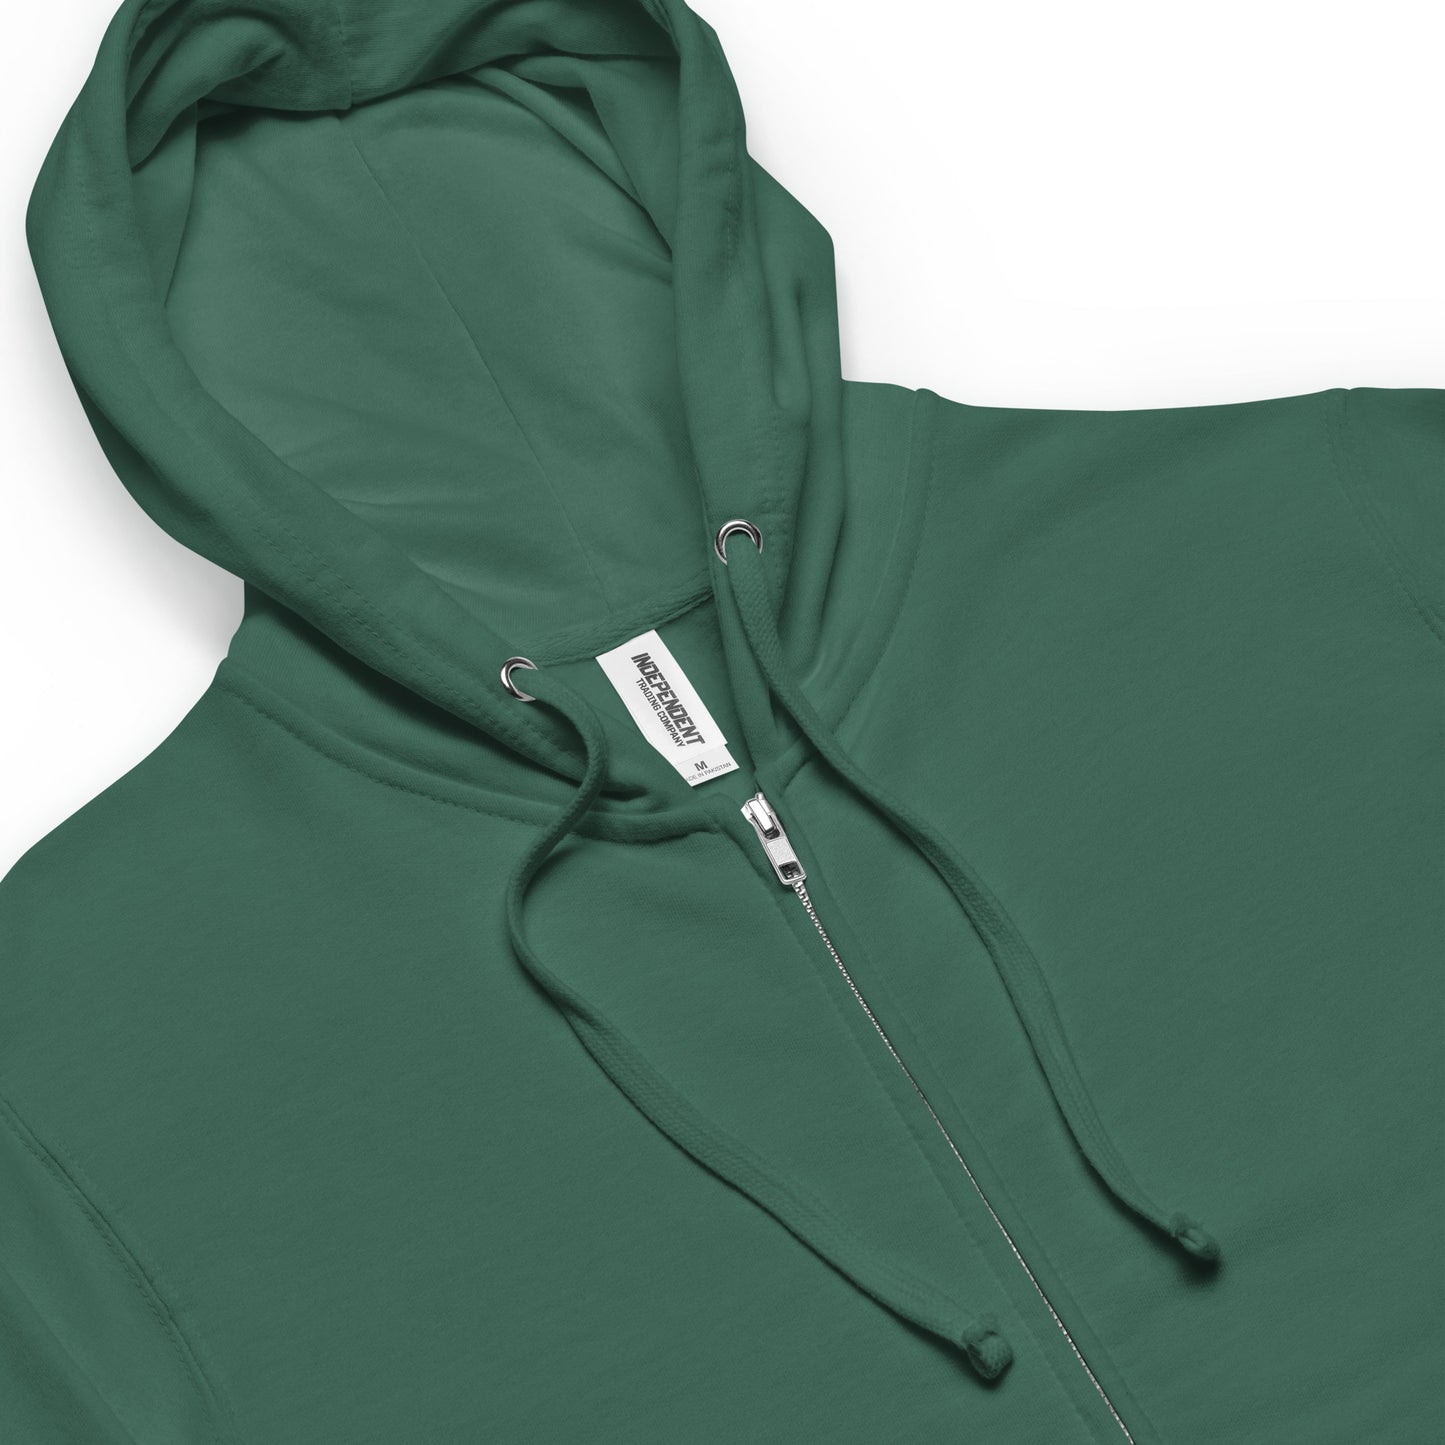 Alpine green colored unisex fleece zip up hoodie. Back design features a watercolor fox in the grass with ferns and mushrooms. Has a jersey-lined hood, metal eyelets and zipper. Detail image shows jersey-lined hood, metal eyelets, draw cords and zipper.